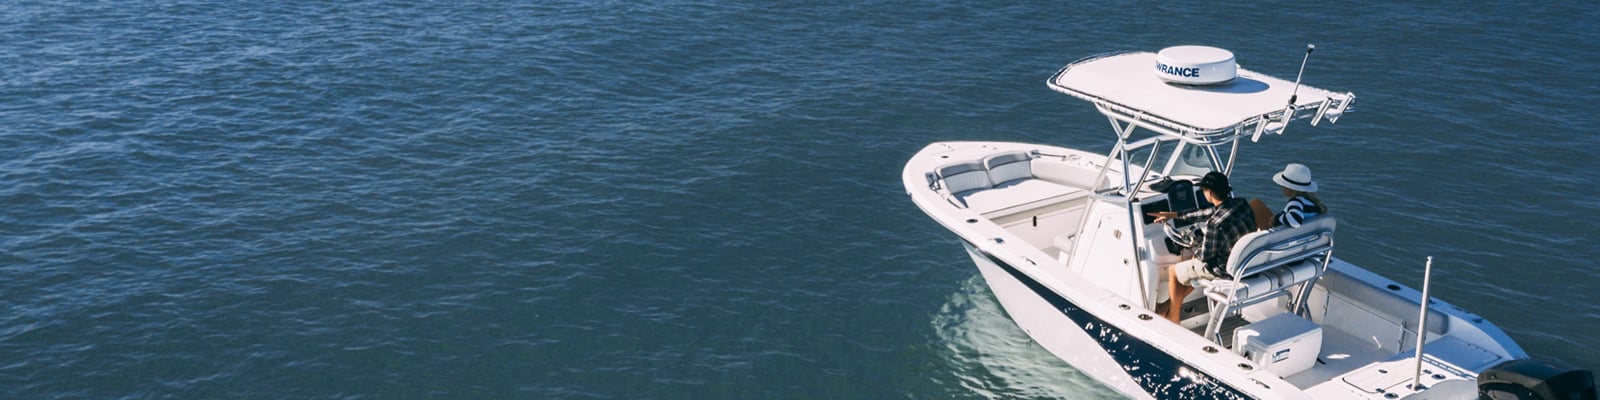 Boat Radar Systems for Recreational Use